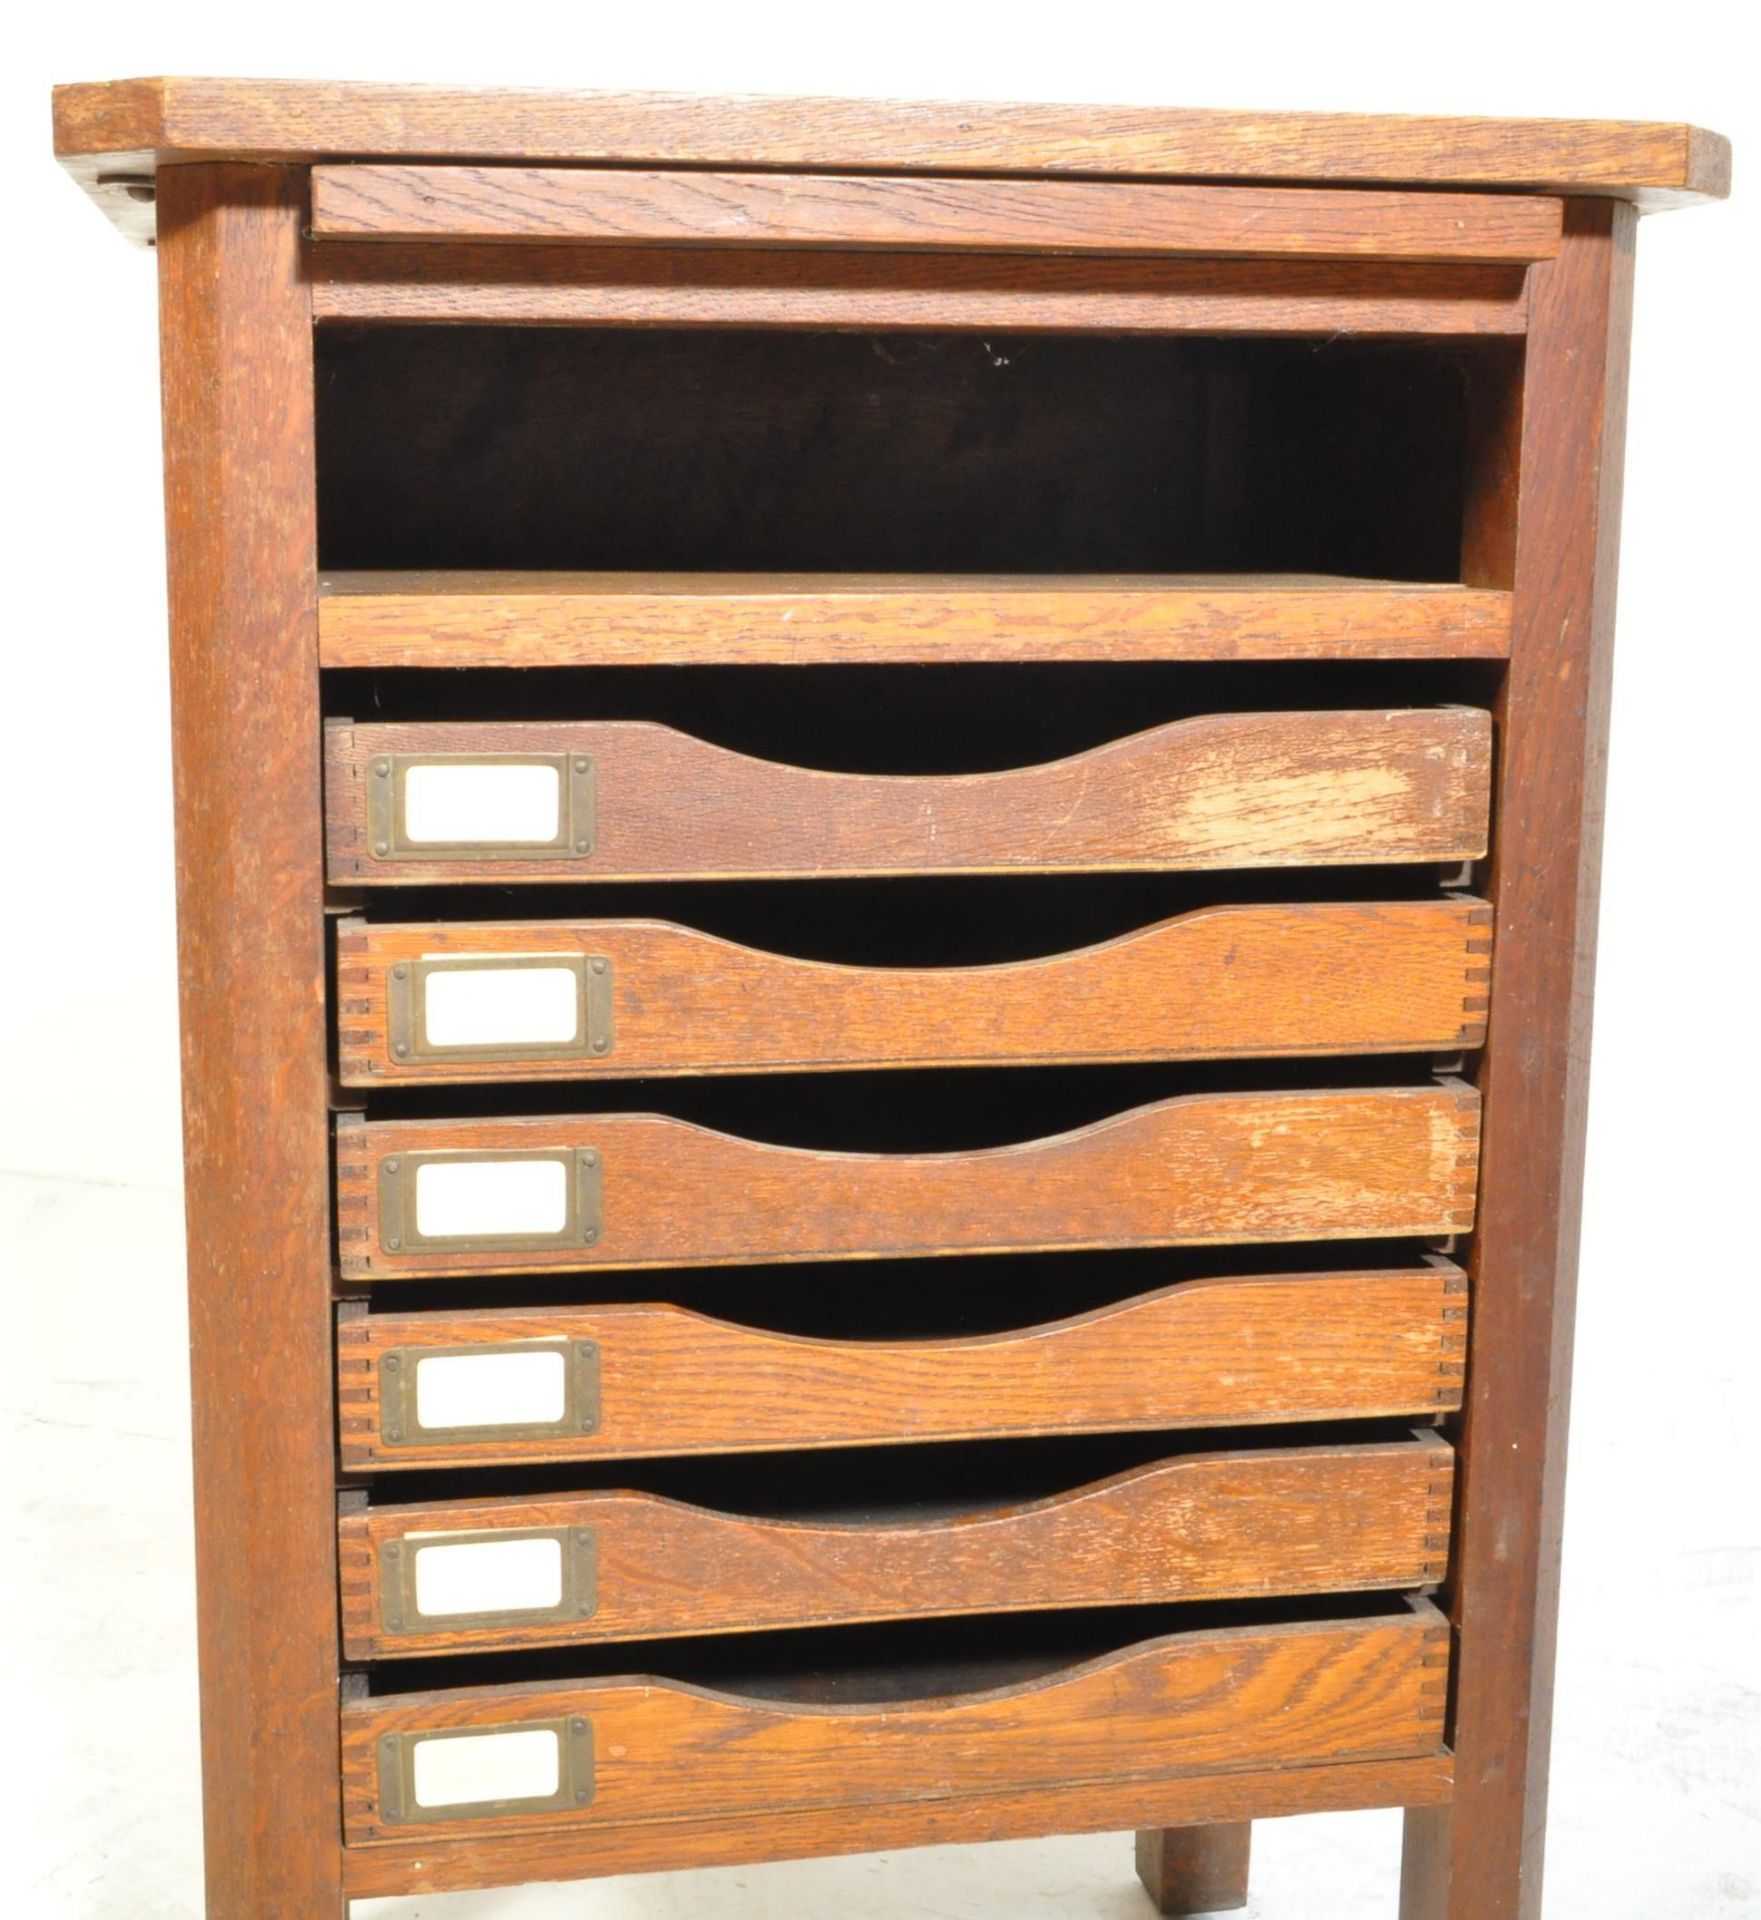 ASTROLA - EARLY 20TH CENTURY OAK OFFICE FILING CABINET - Image 6 of 6